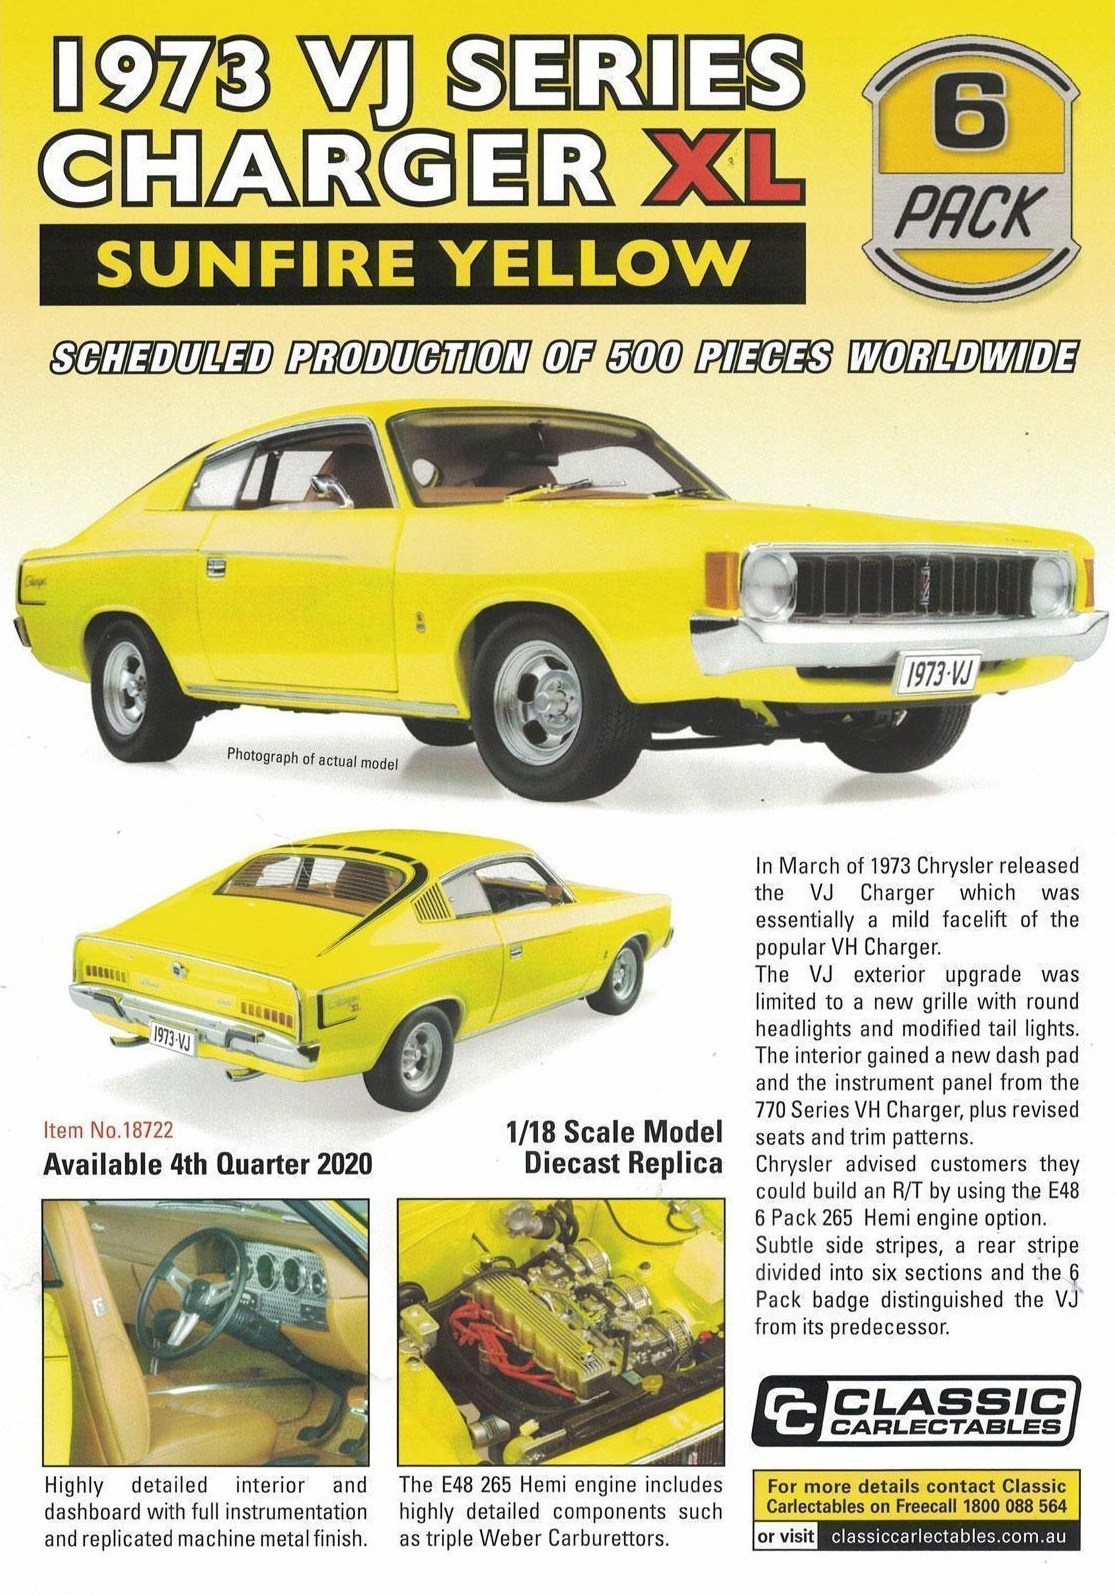 PRE ORDER - 1973 Chrysler VJ Series Charger XL Sunfire Yellow 1:18 Scale Model Car (FULL PRICE - $279.00*)